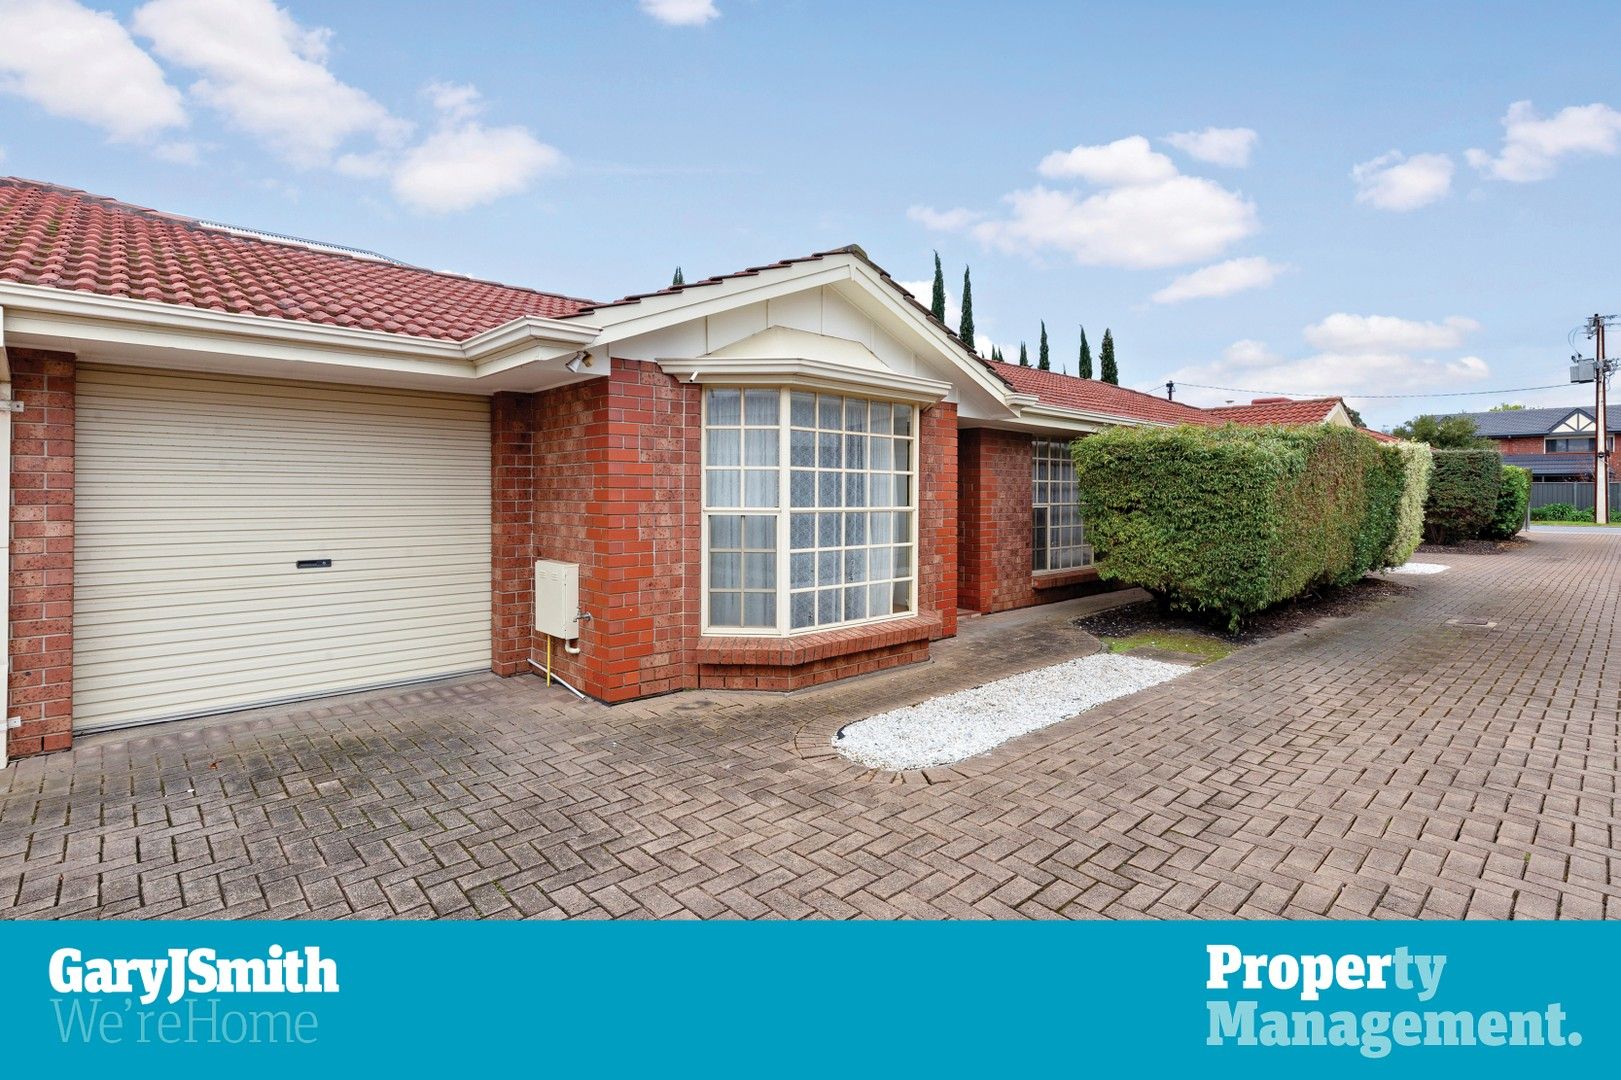 2 bedrooms House in 3/48 West Street ASCOT PARK SA, 5043